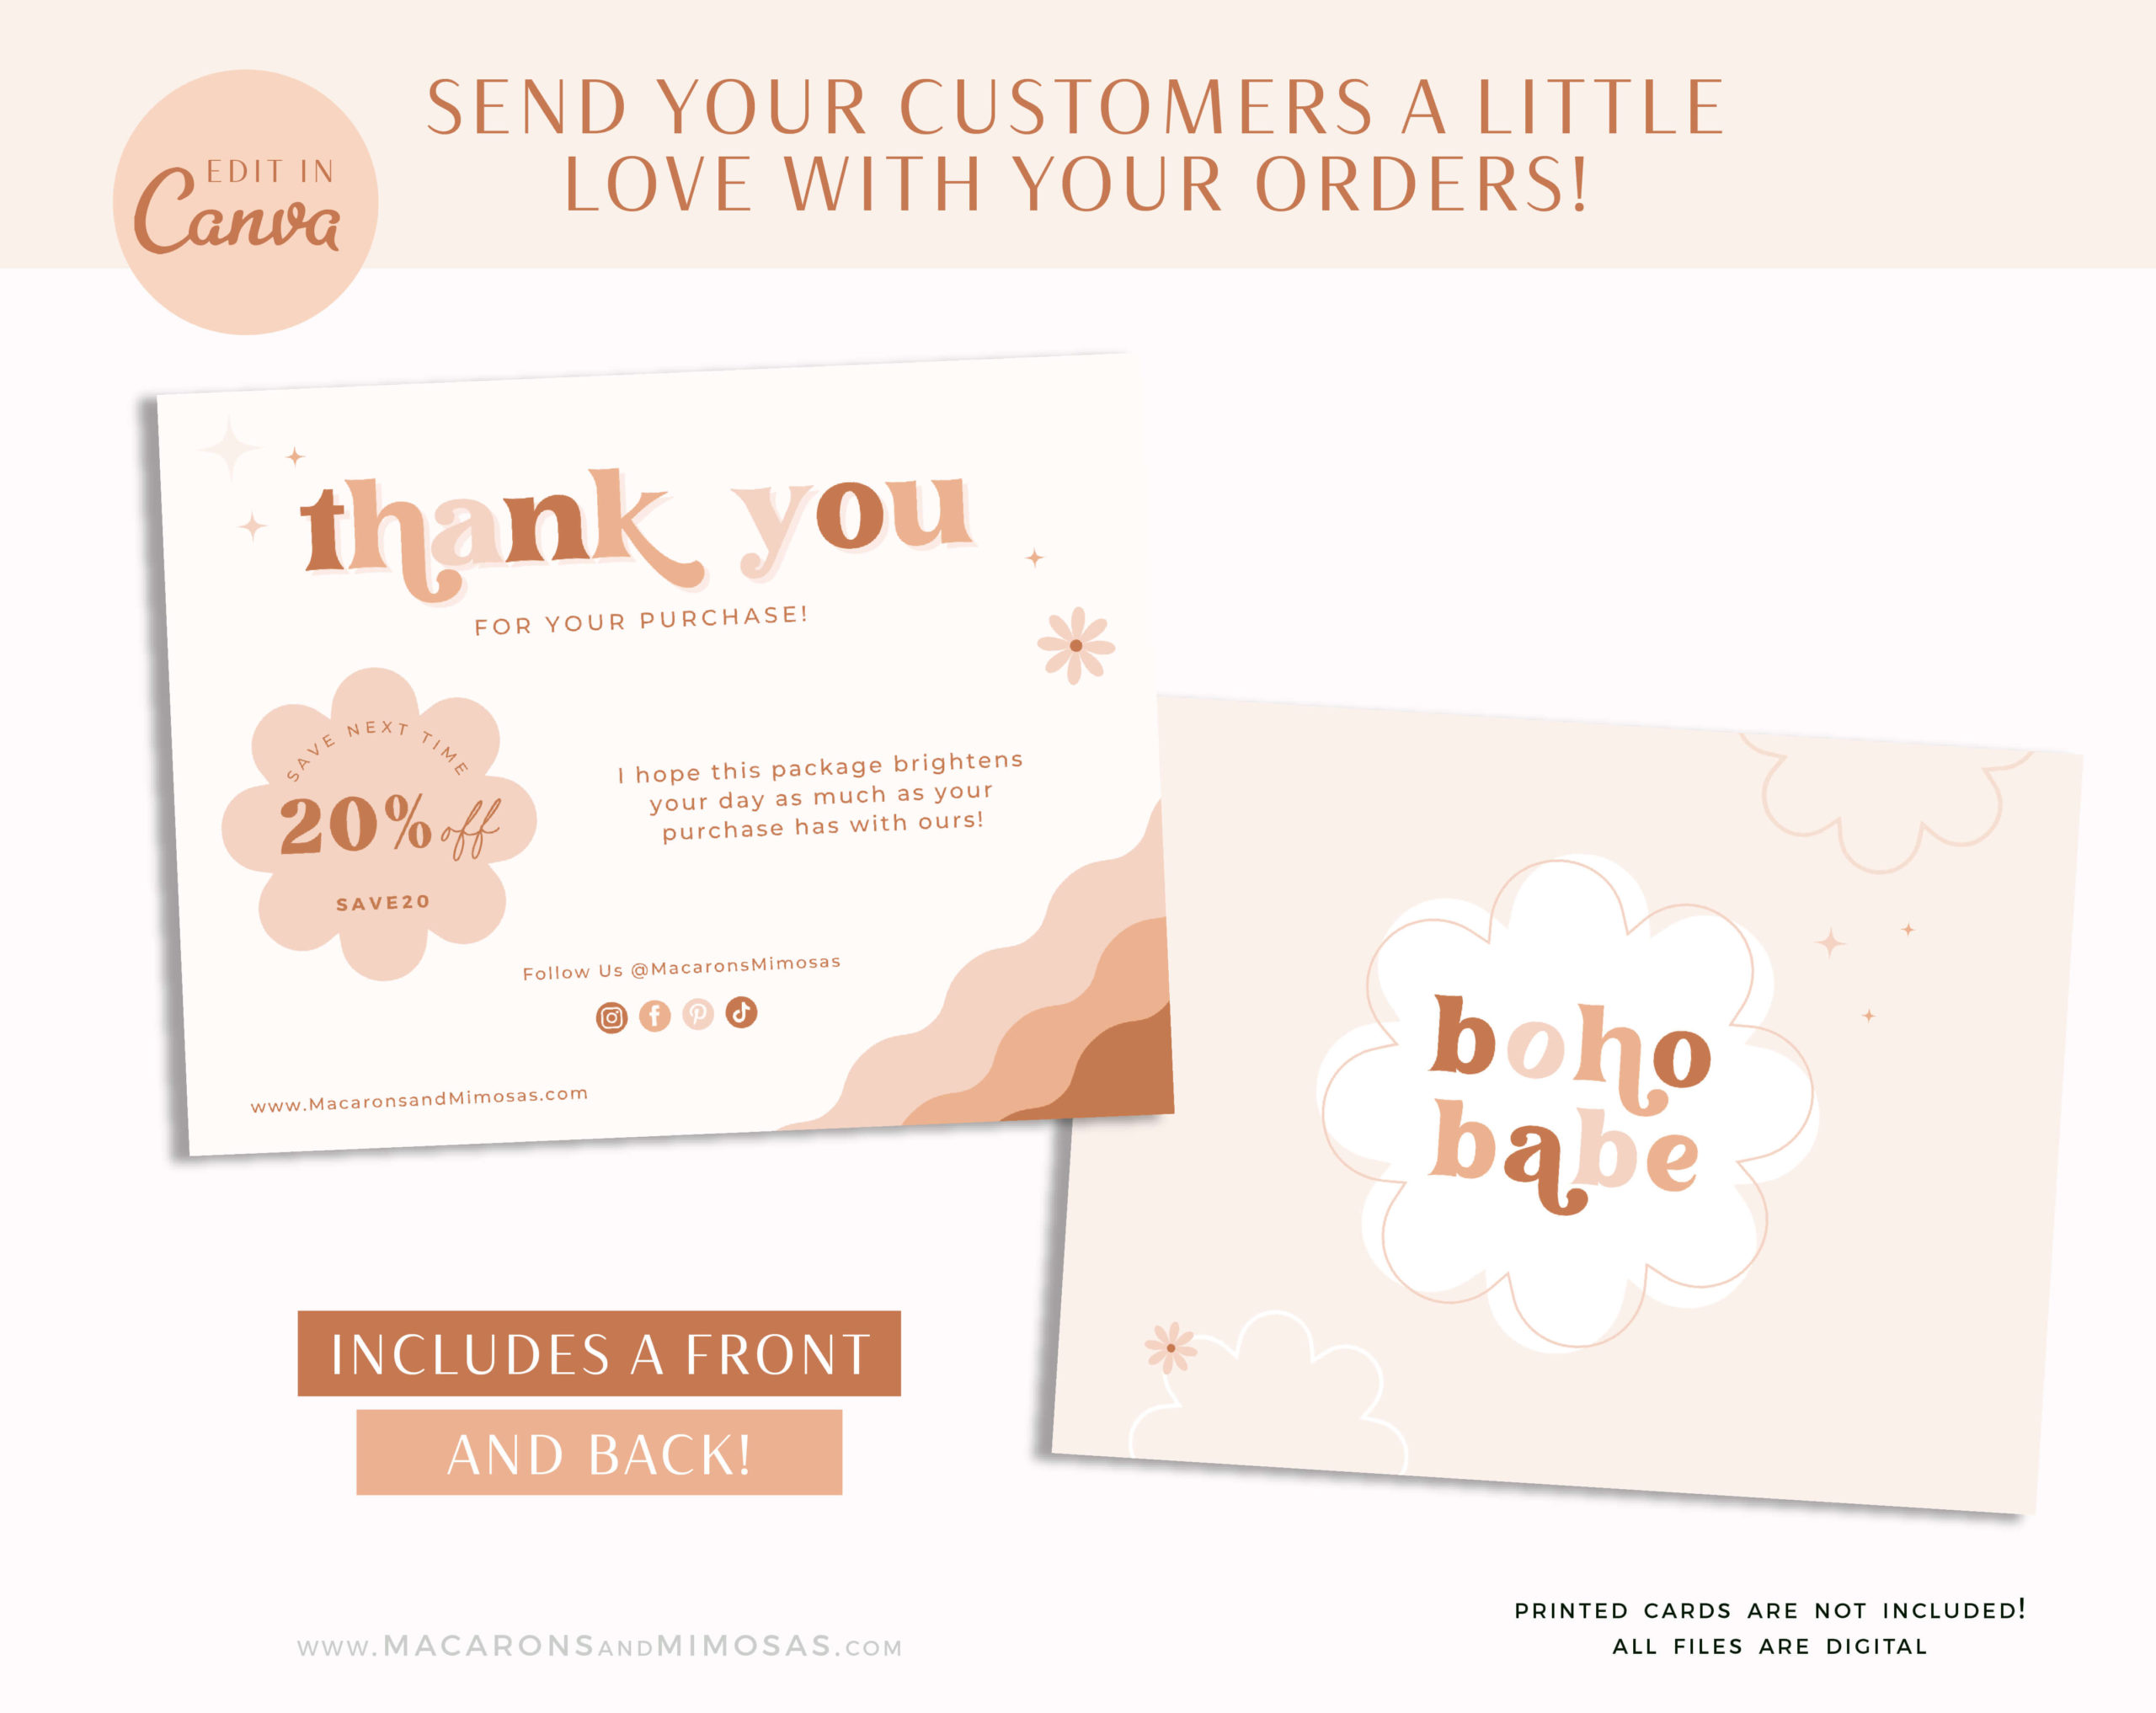 Pink Boho Thank You Card Template, Customizable fun and neutral Packaging Insert Card, DIY Aesthetic Discount Coupon Thank You design